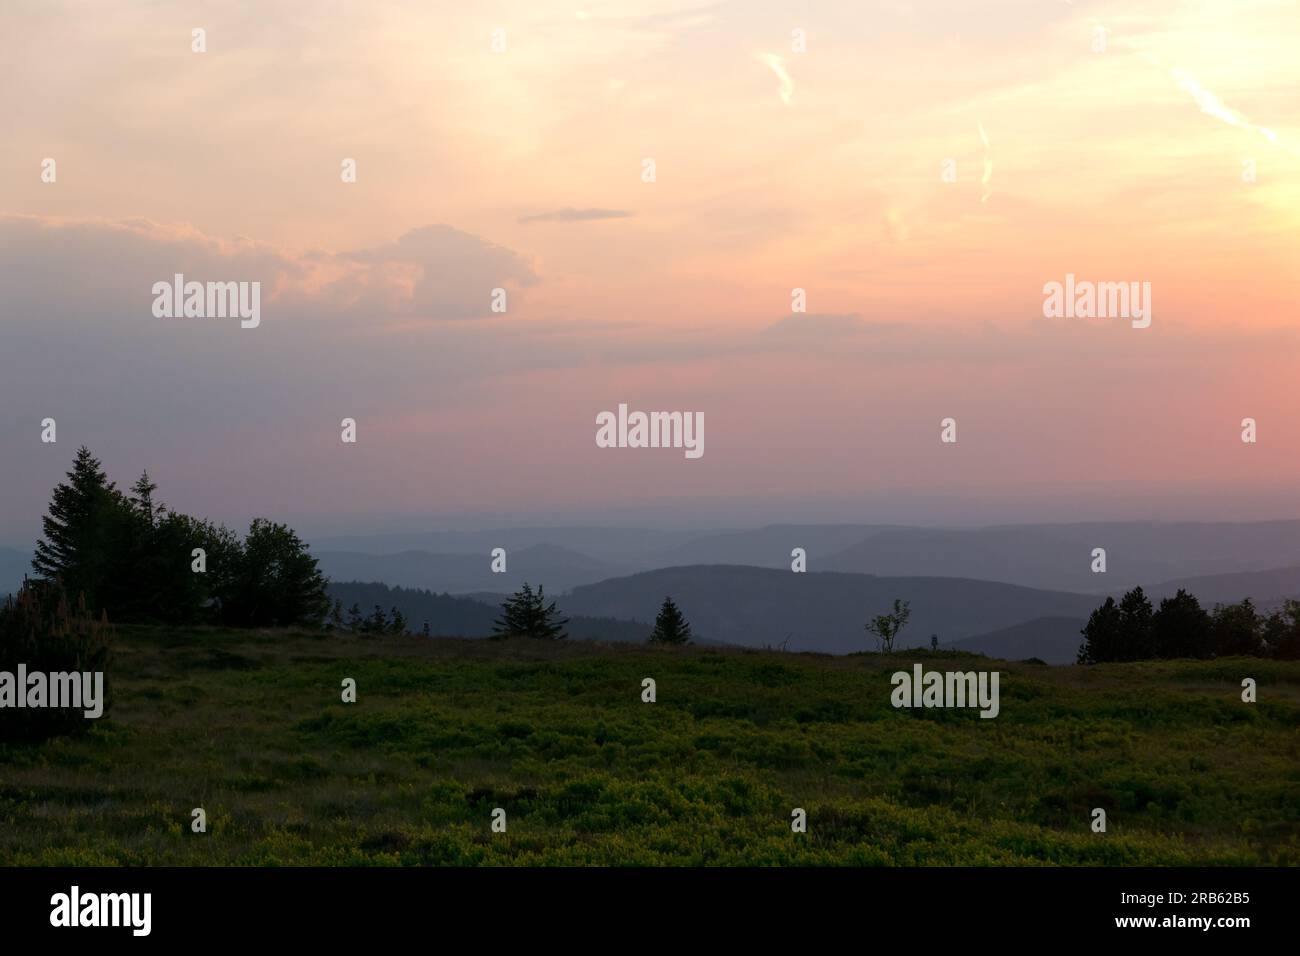 Hilly landscape shortly after sunset: silhouettes of hills under an orange-yellow colored sky Stock Photo